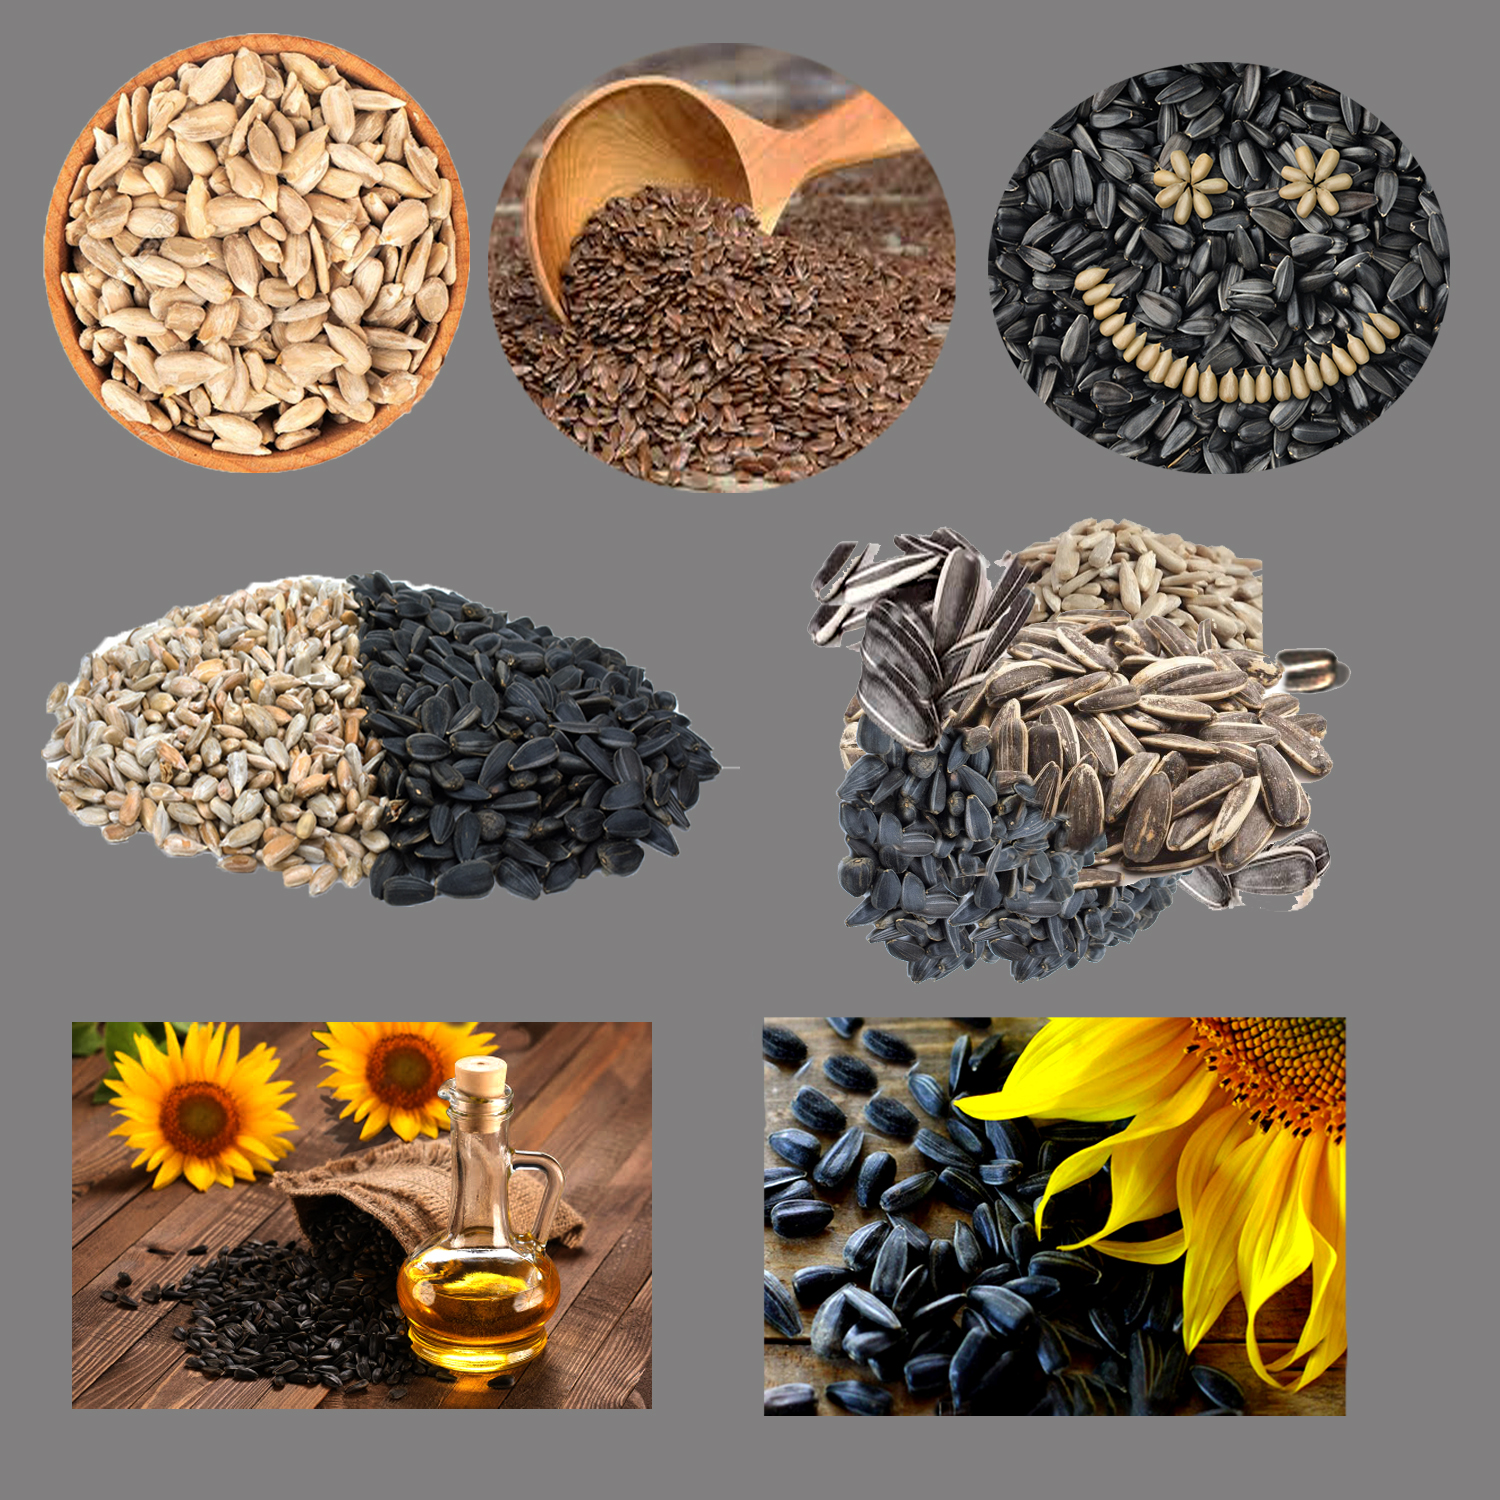 Sunflower seeds benefits for hair, health and skin - Hair falled